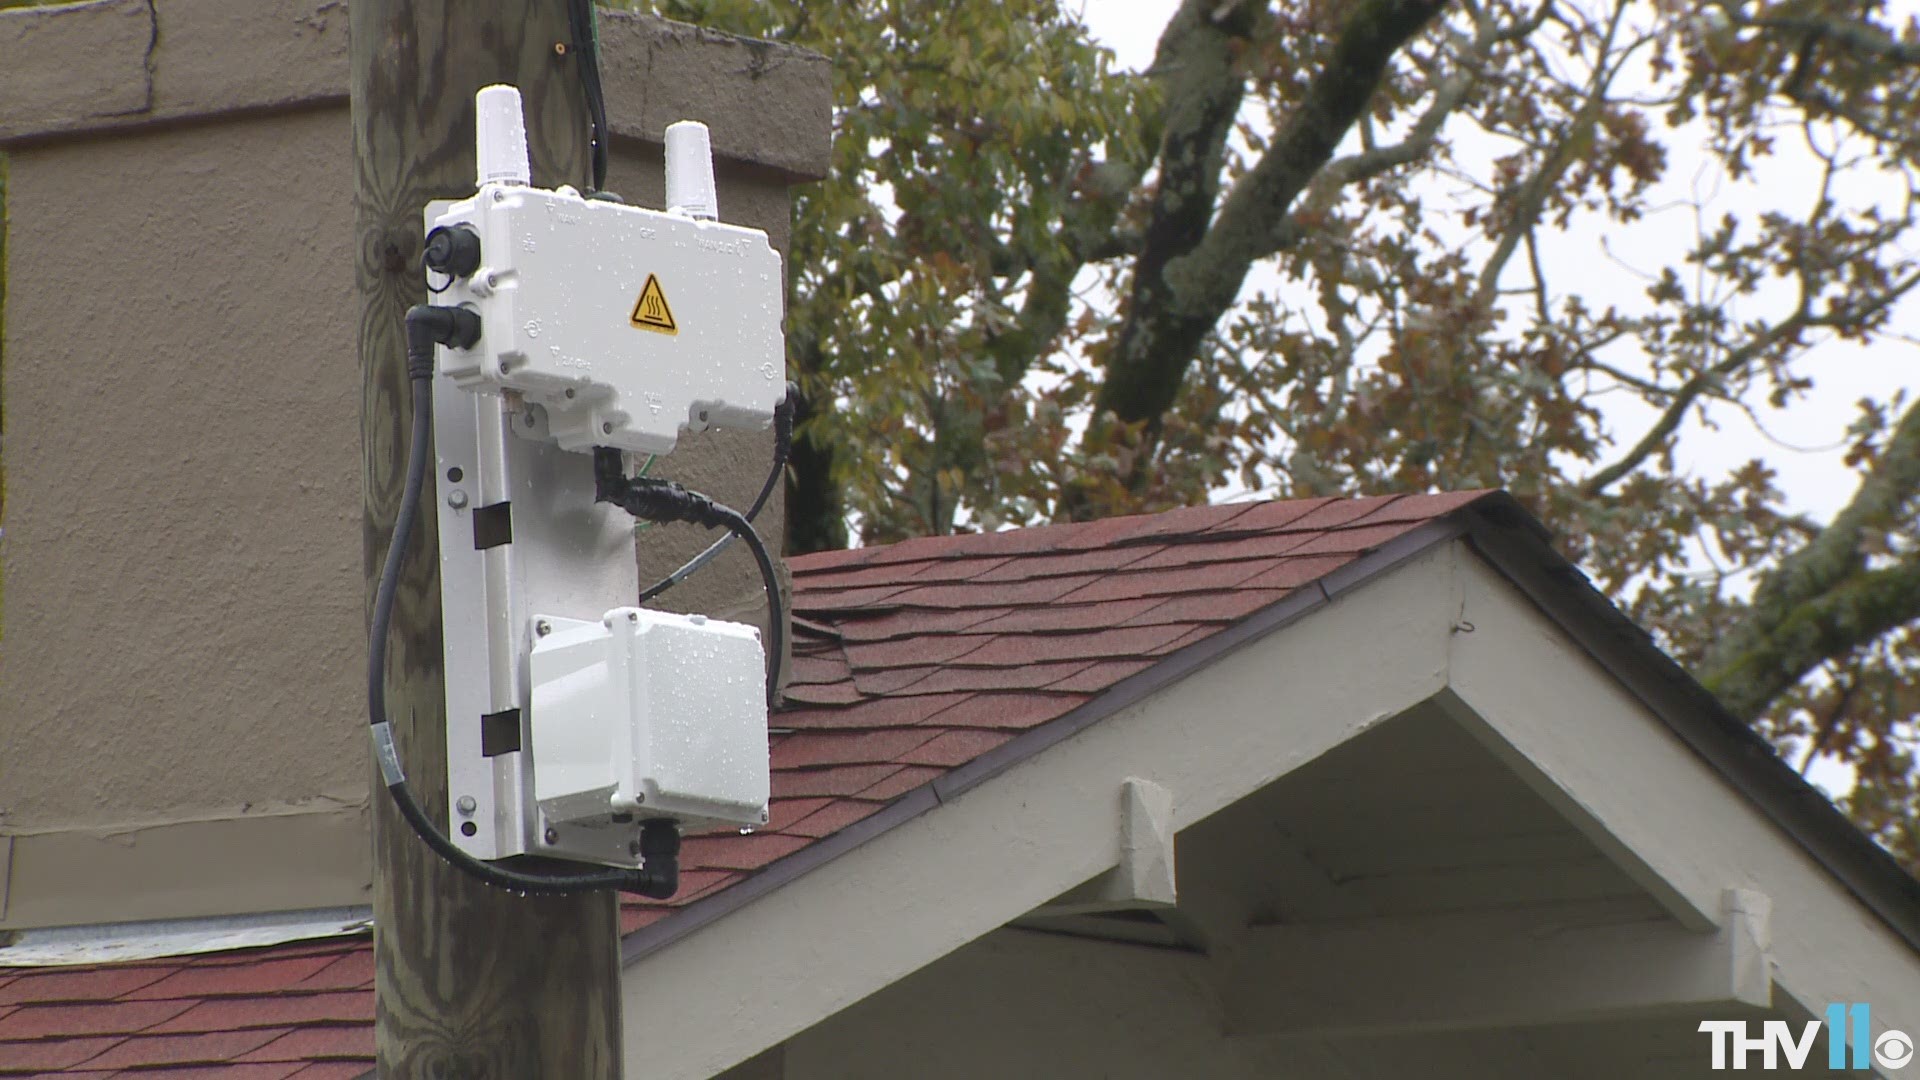 You ask, we listen. An electronic device on a power pole in Hillcrest has gotten the attention of some homeowners.